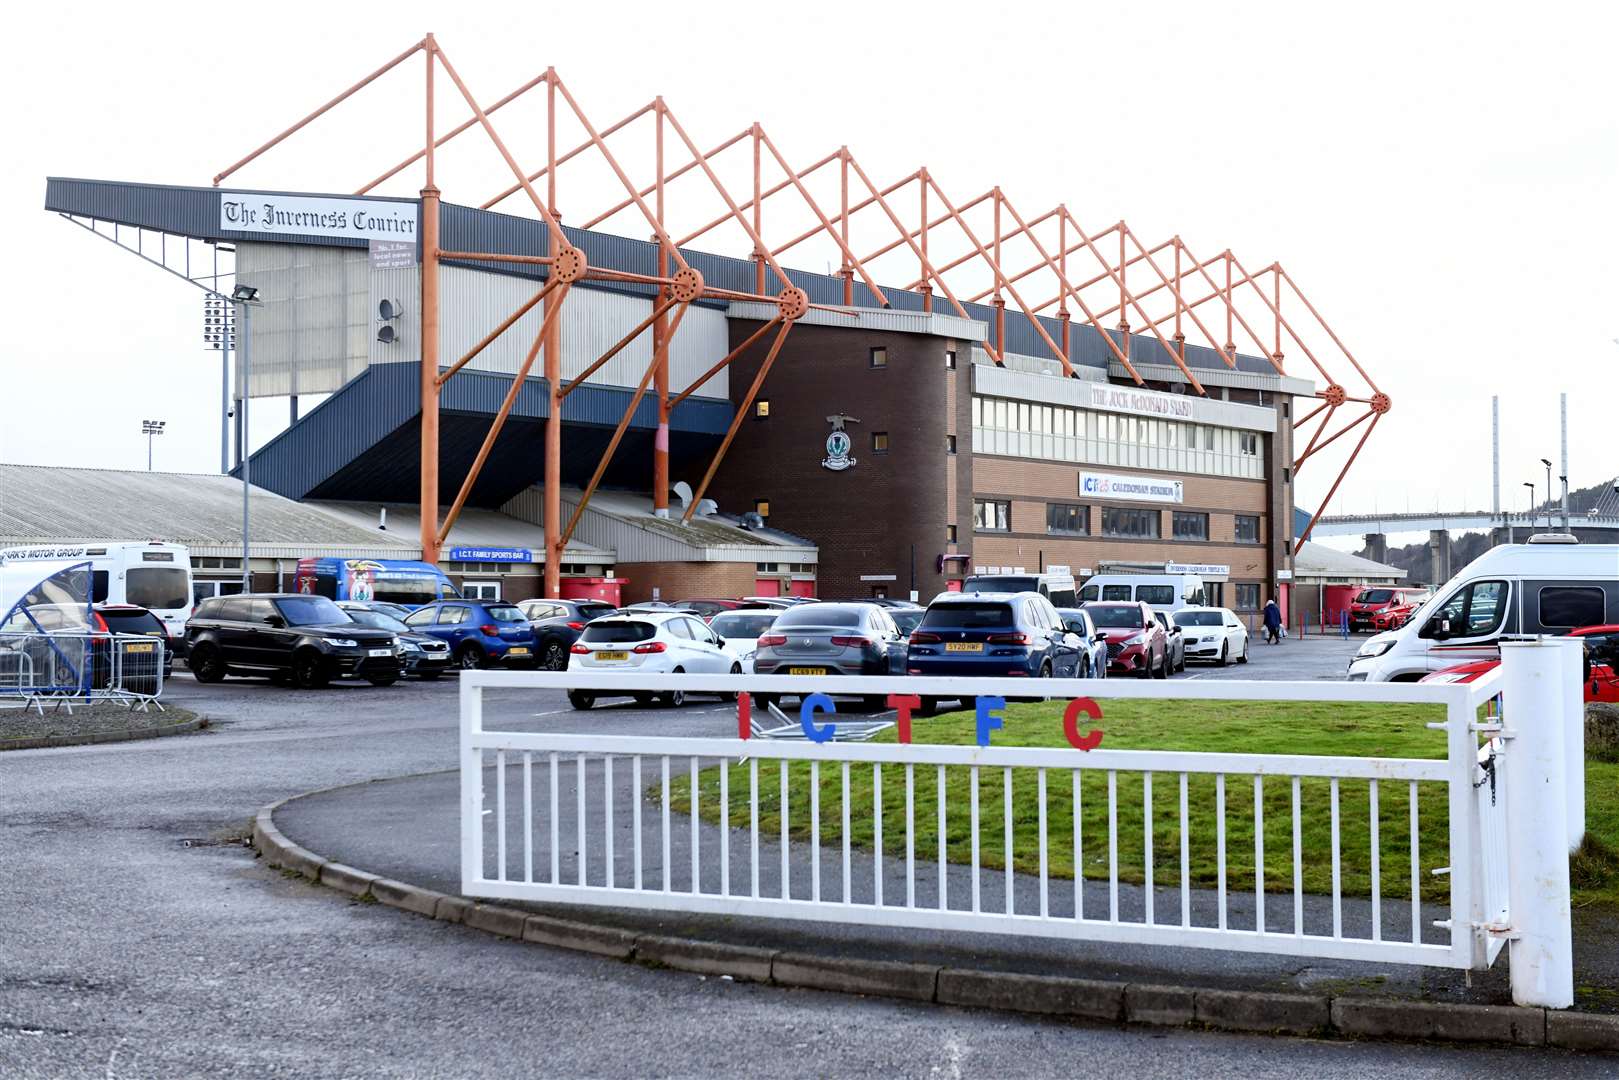 Caley Thistle Stadium event could open the gate to business funding.